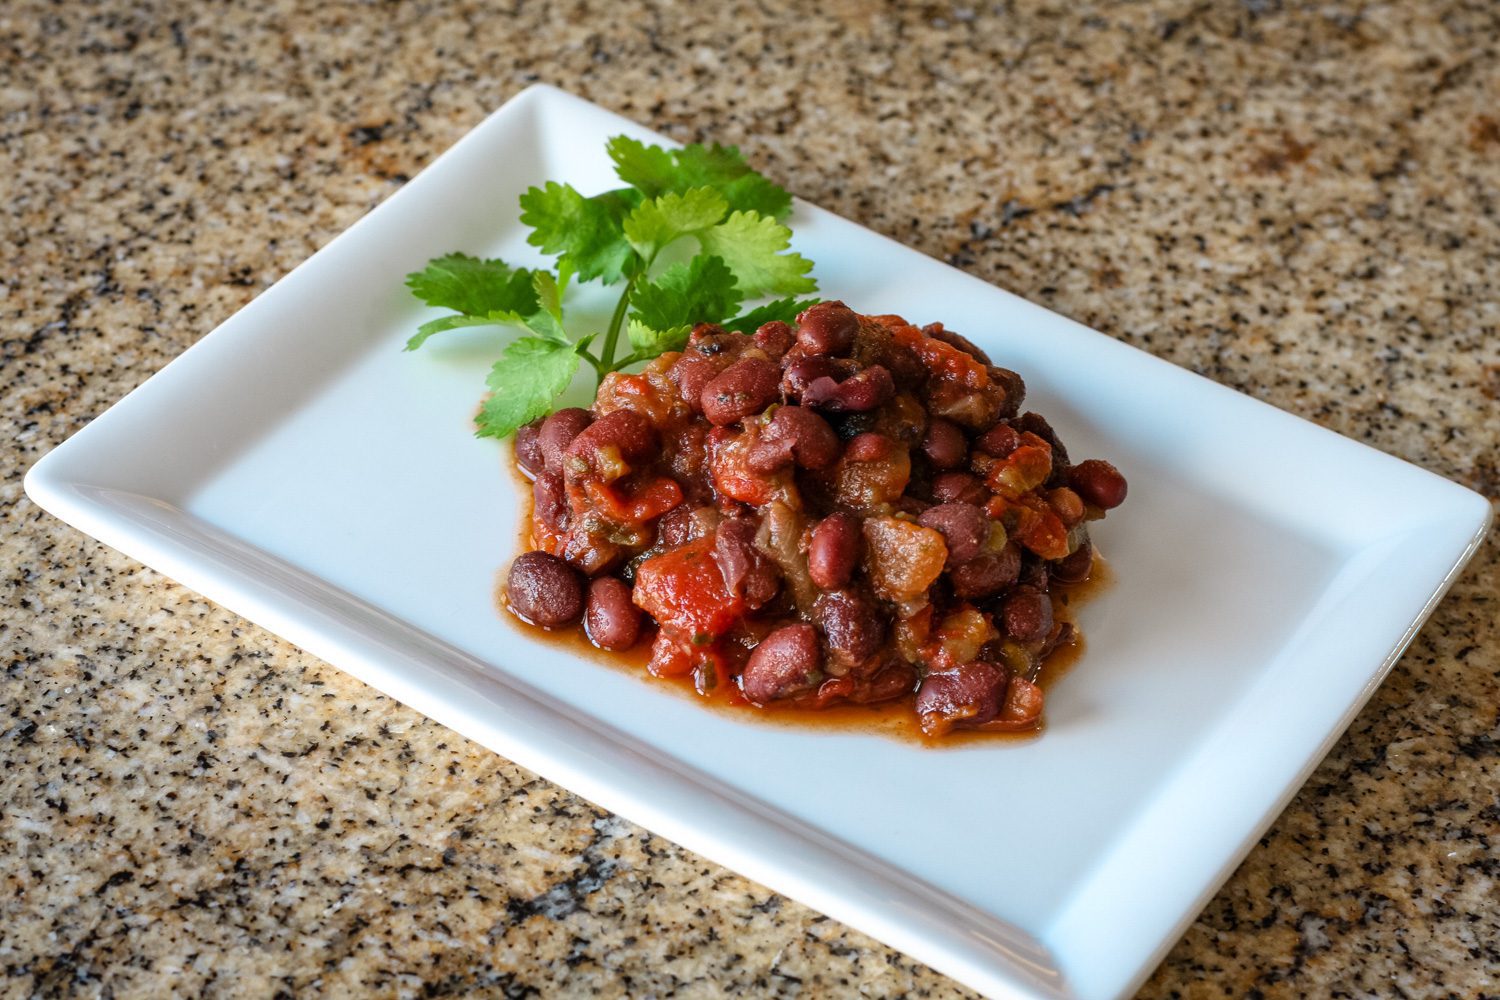 tex mex black beans and tomatoes on a plate with cilantro leaves